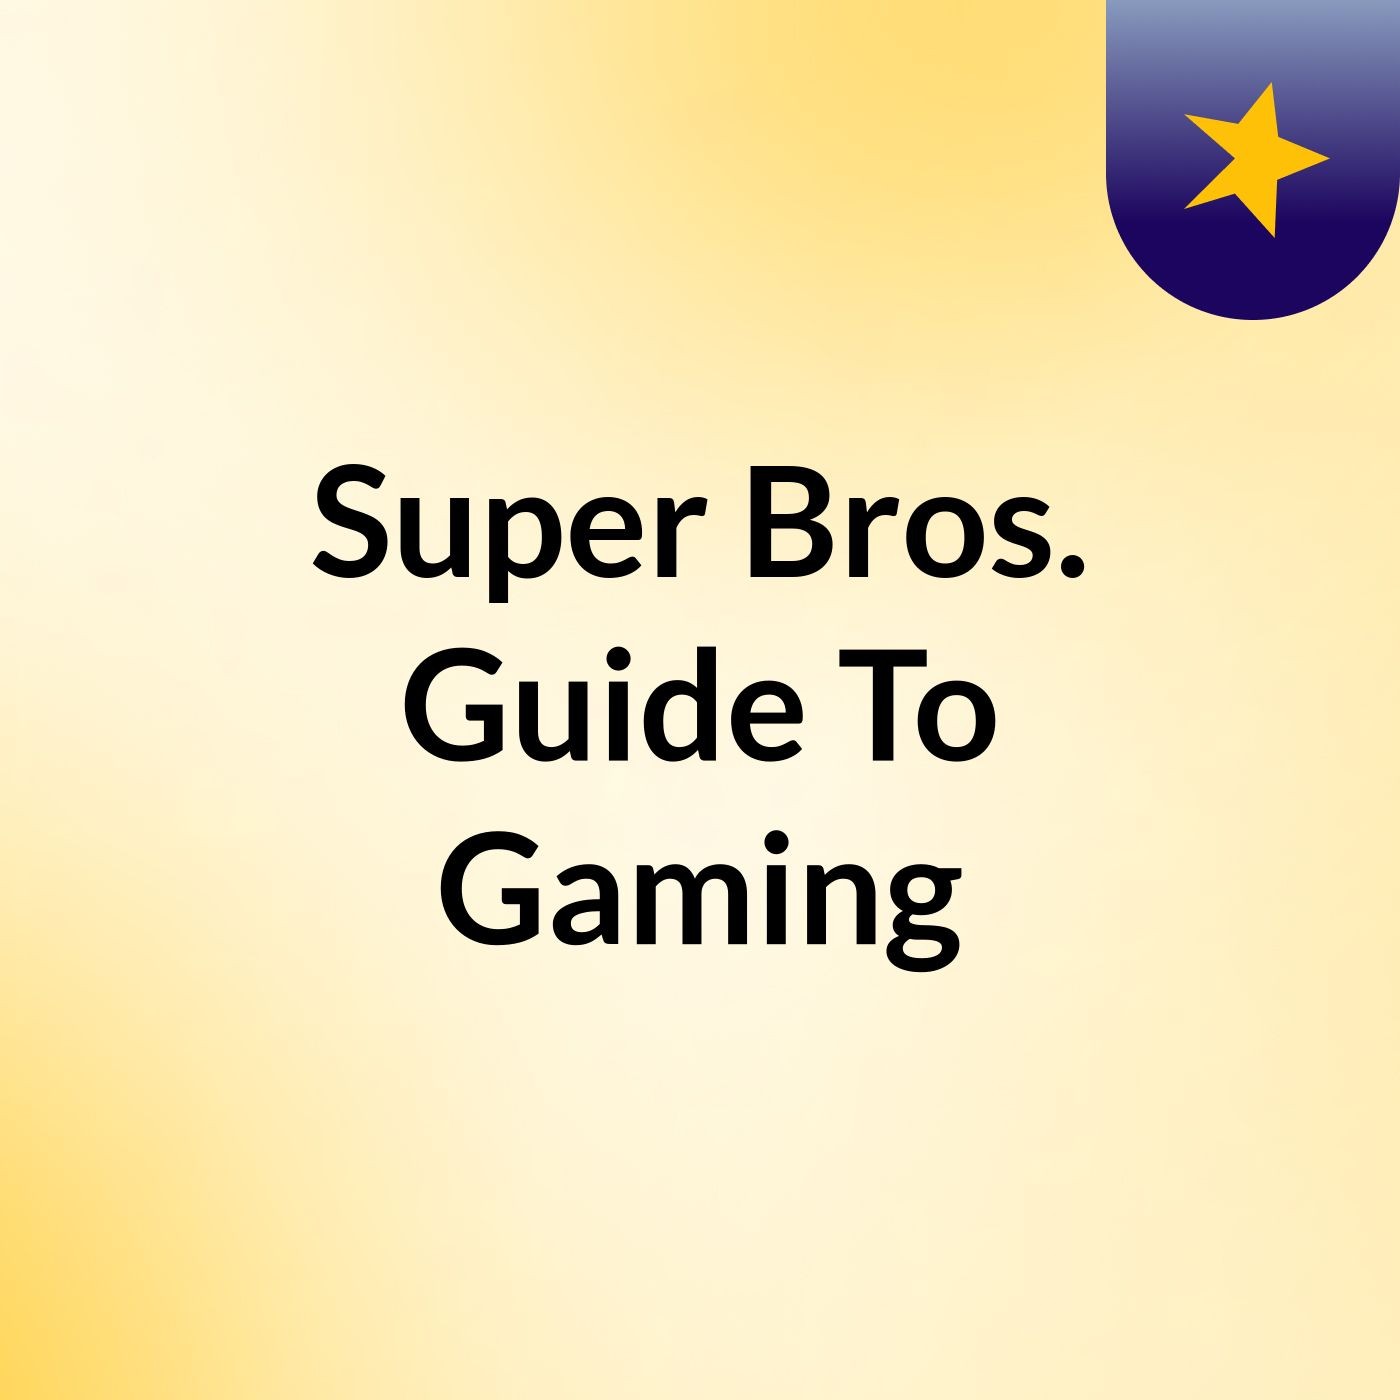 Super Bros. Guide To Gaming